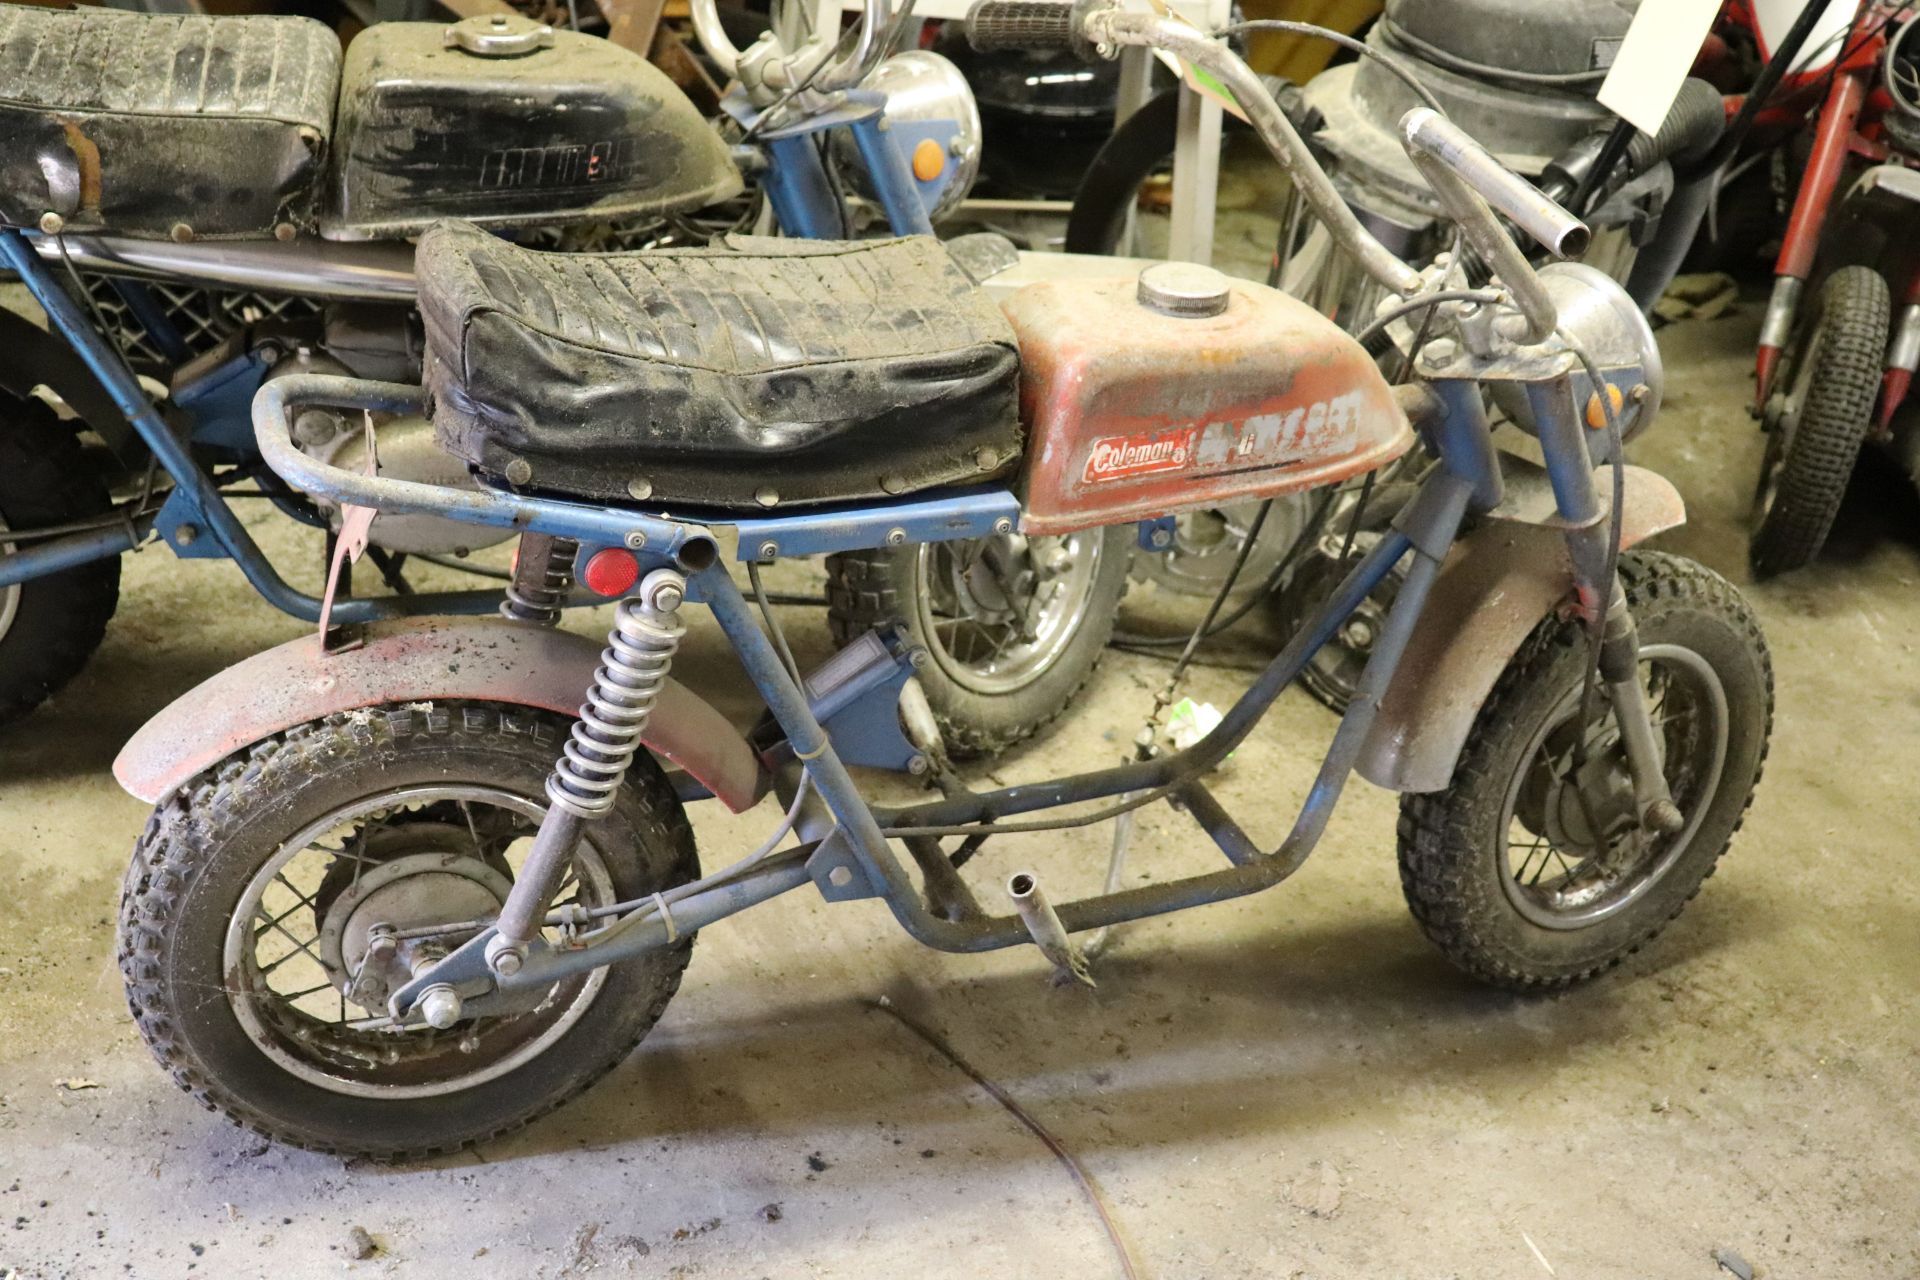 1971 Coleman Sport 240 mini bike, turns over MINI BIKES MARKED AS PARTS BIKES, NOT OPERATIONAL, COND